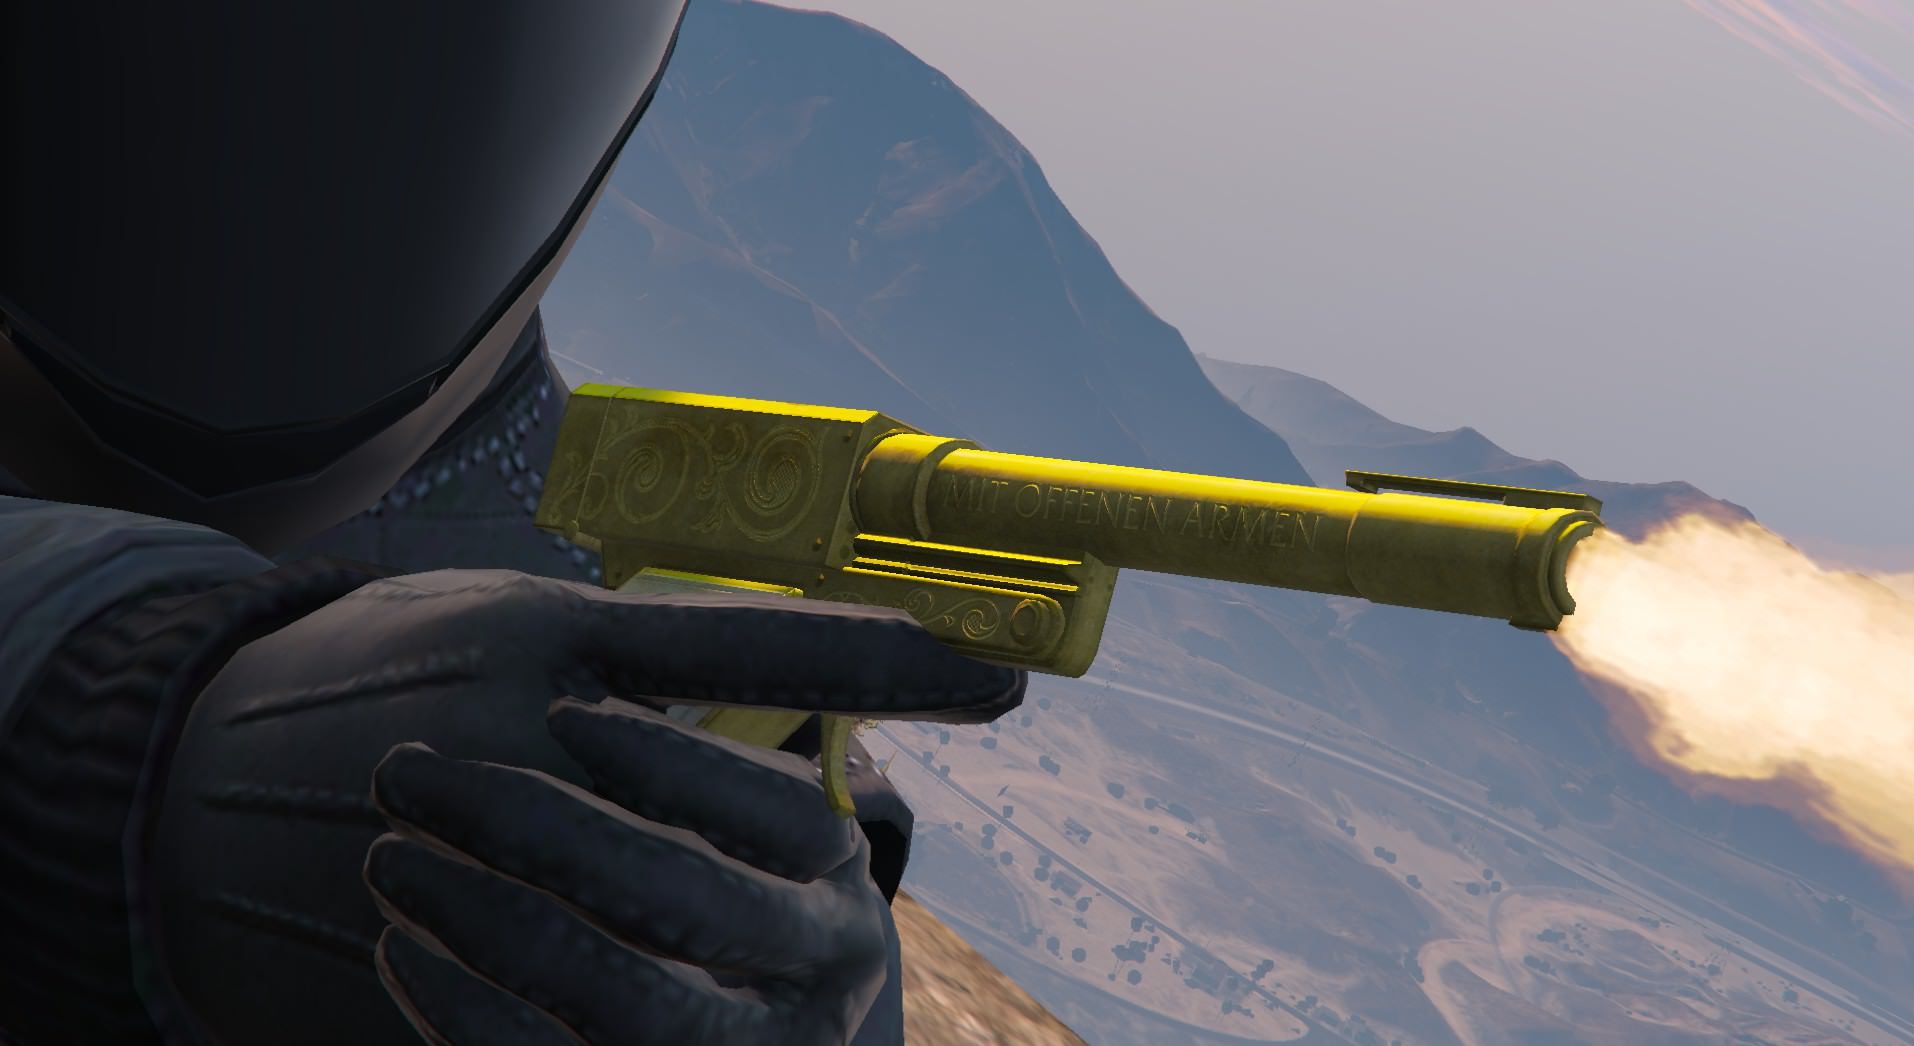 Having a quick look at the new Cayo Perico Heist weaponry, featuring the tamed racing animal 19